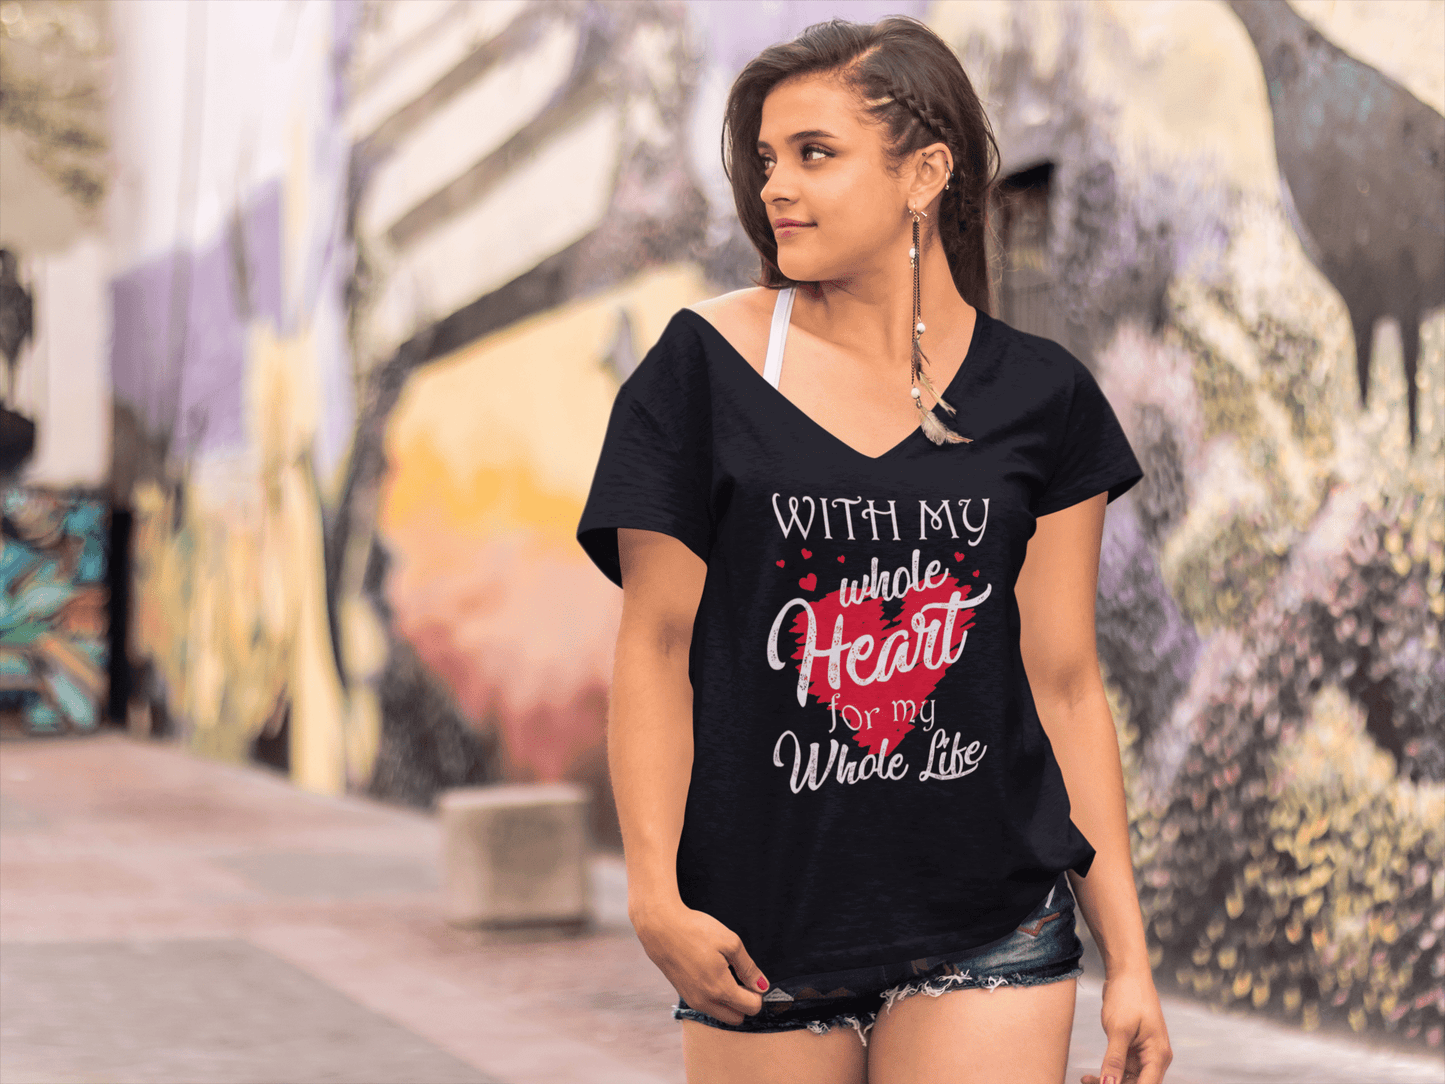 ULTRABASIC Women's T-Shirt With My Whole Heart For My Whole Life - Valentine's Day Short Sleeve Graphic Tees Tops